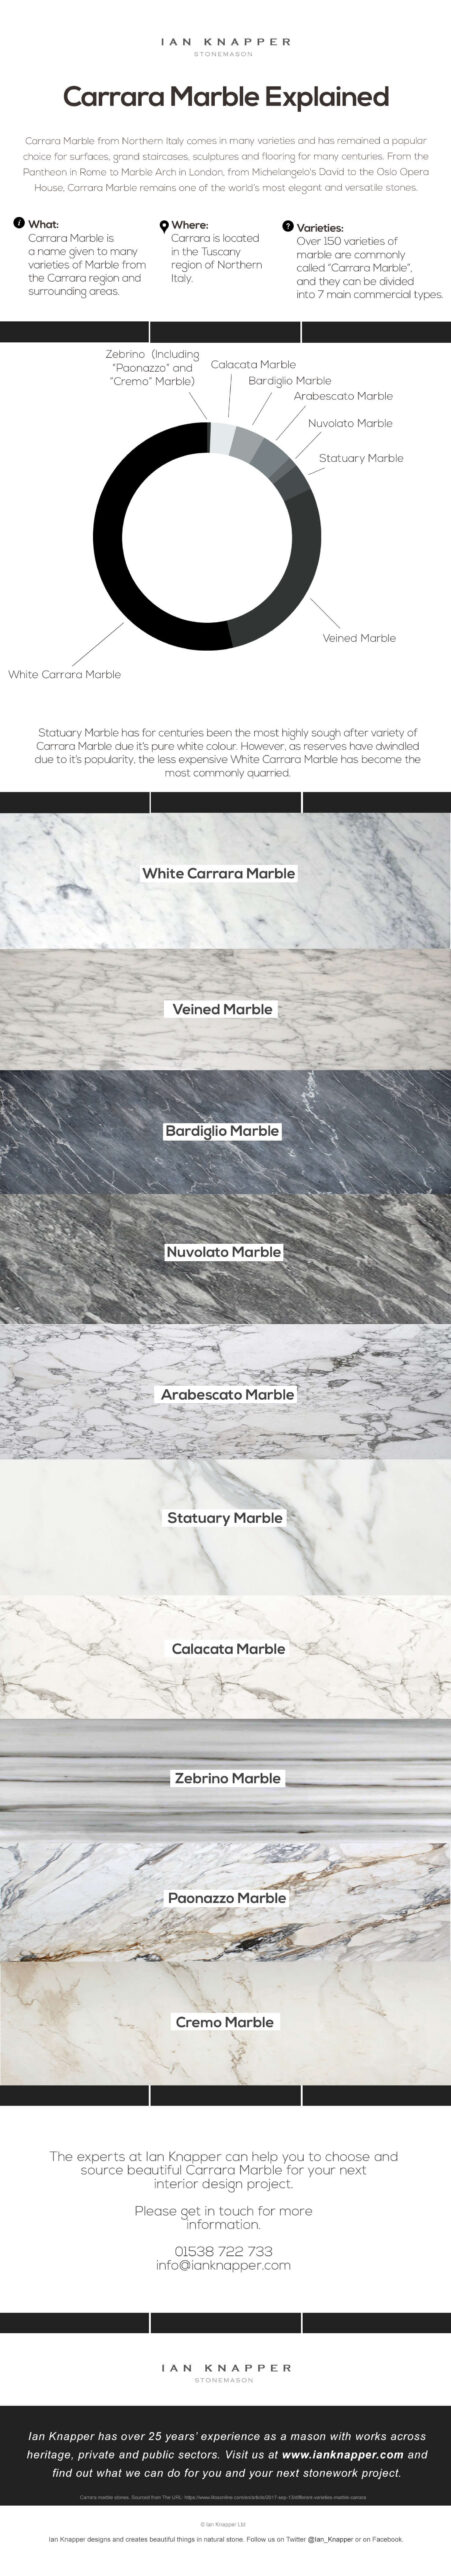 10-top-carrara-marble-stones-and-facts